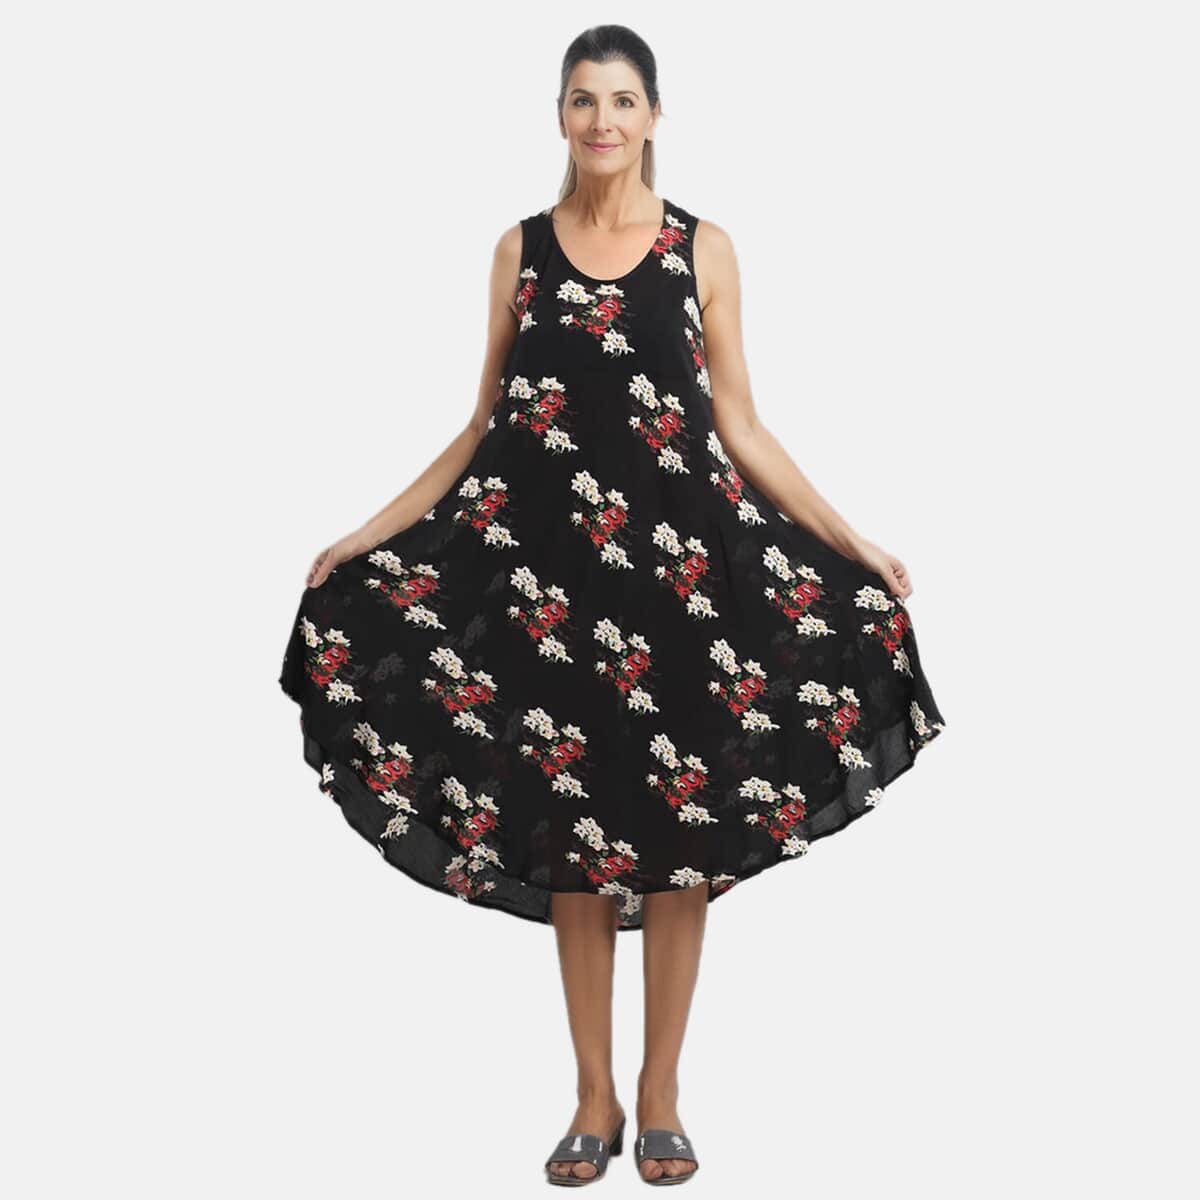 TAMSY Black Women's Repeat Floral Print Umbrella Dress -One Size Missy (44"x23") image number 1